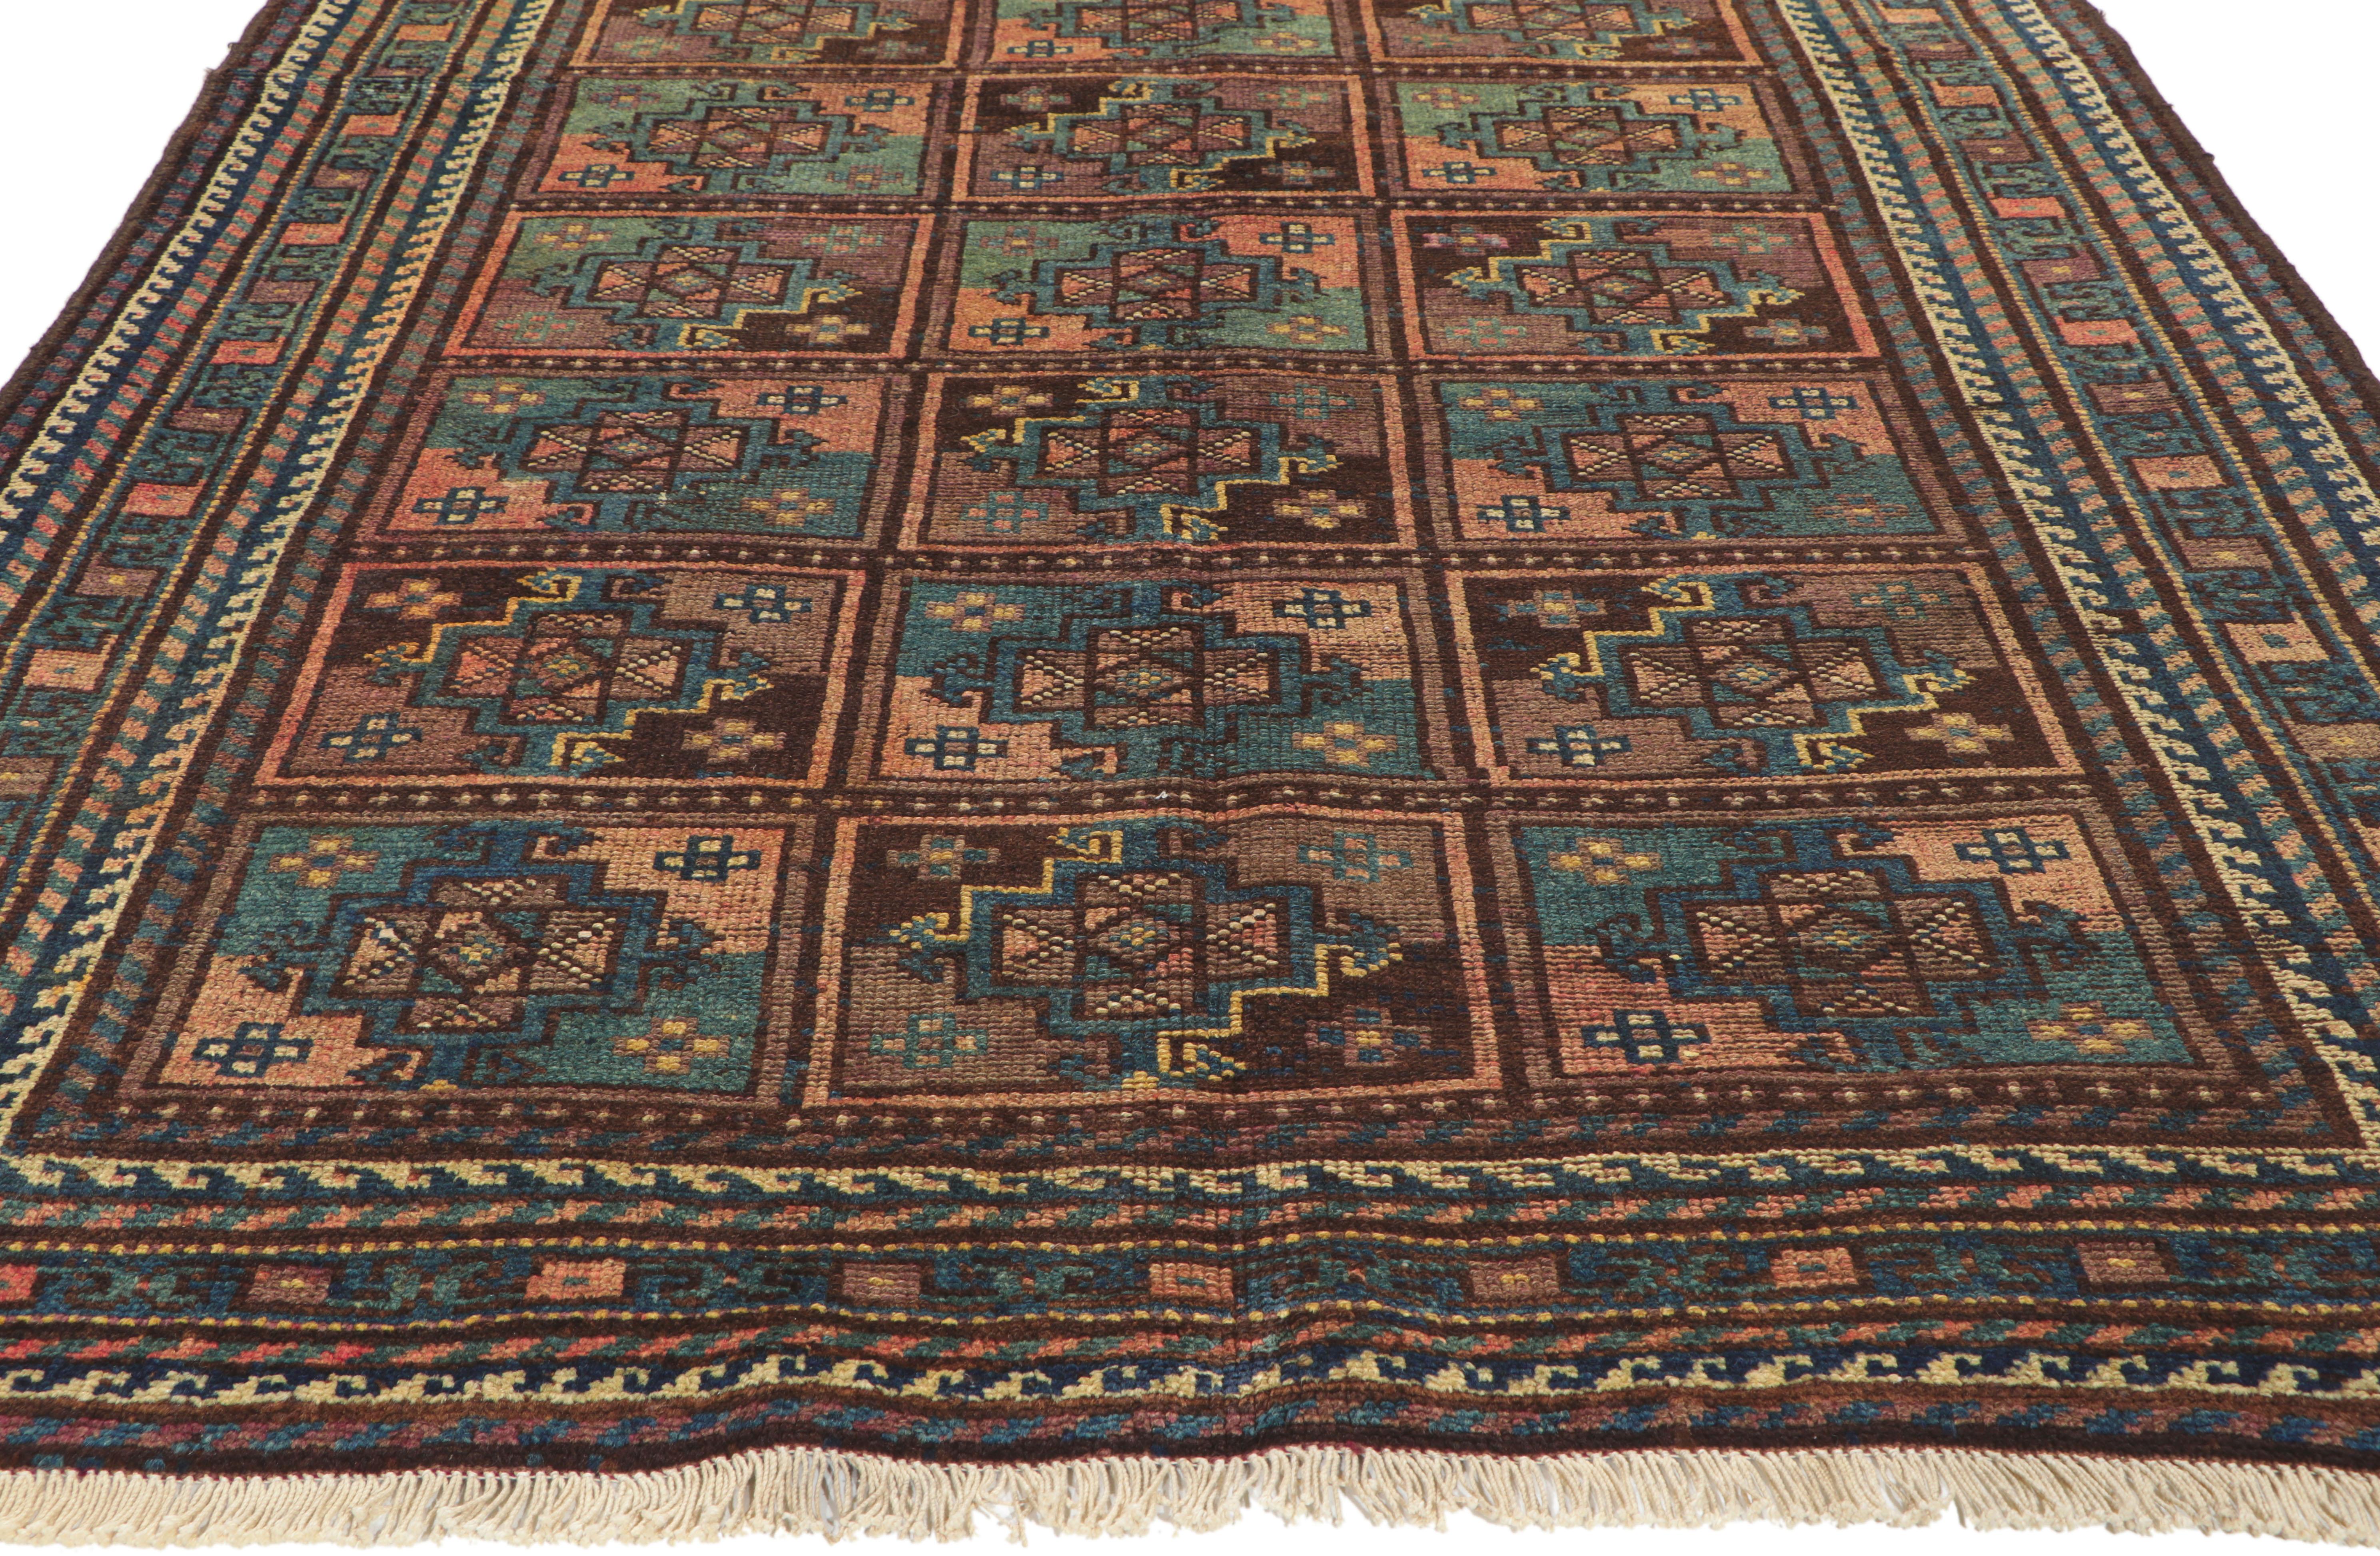 20th Century Vintage Shiraz Persian Rug with Mid-Century Modern Tribal Style